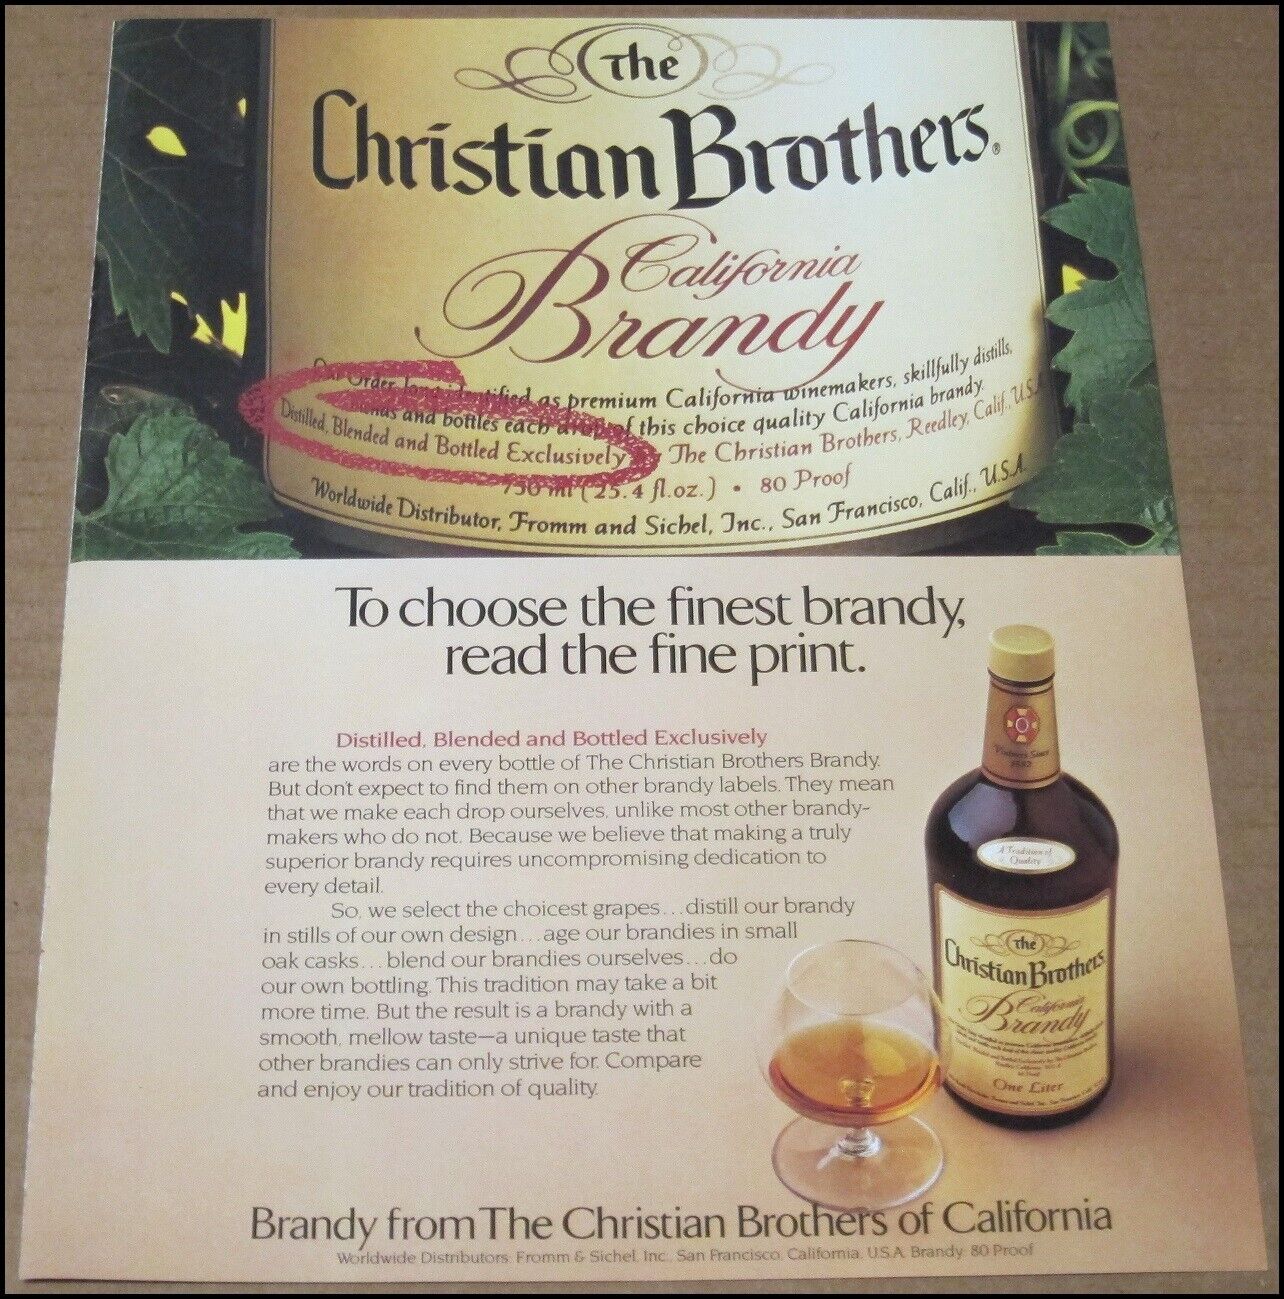 1982 The Christian Brothers Brandy Print Ad Advertisement Vintage Budweiser Beer